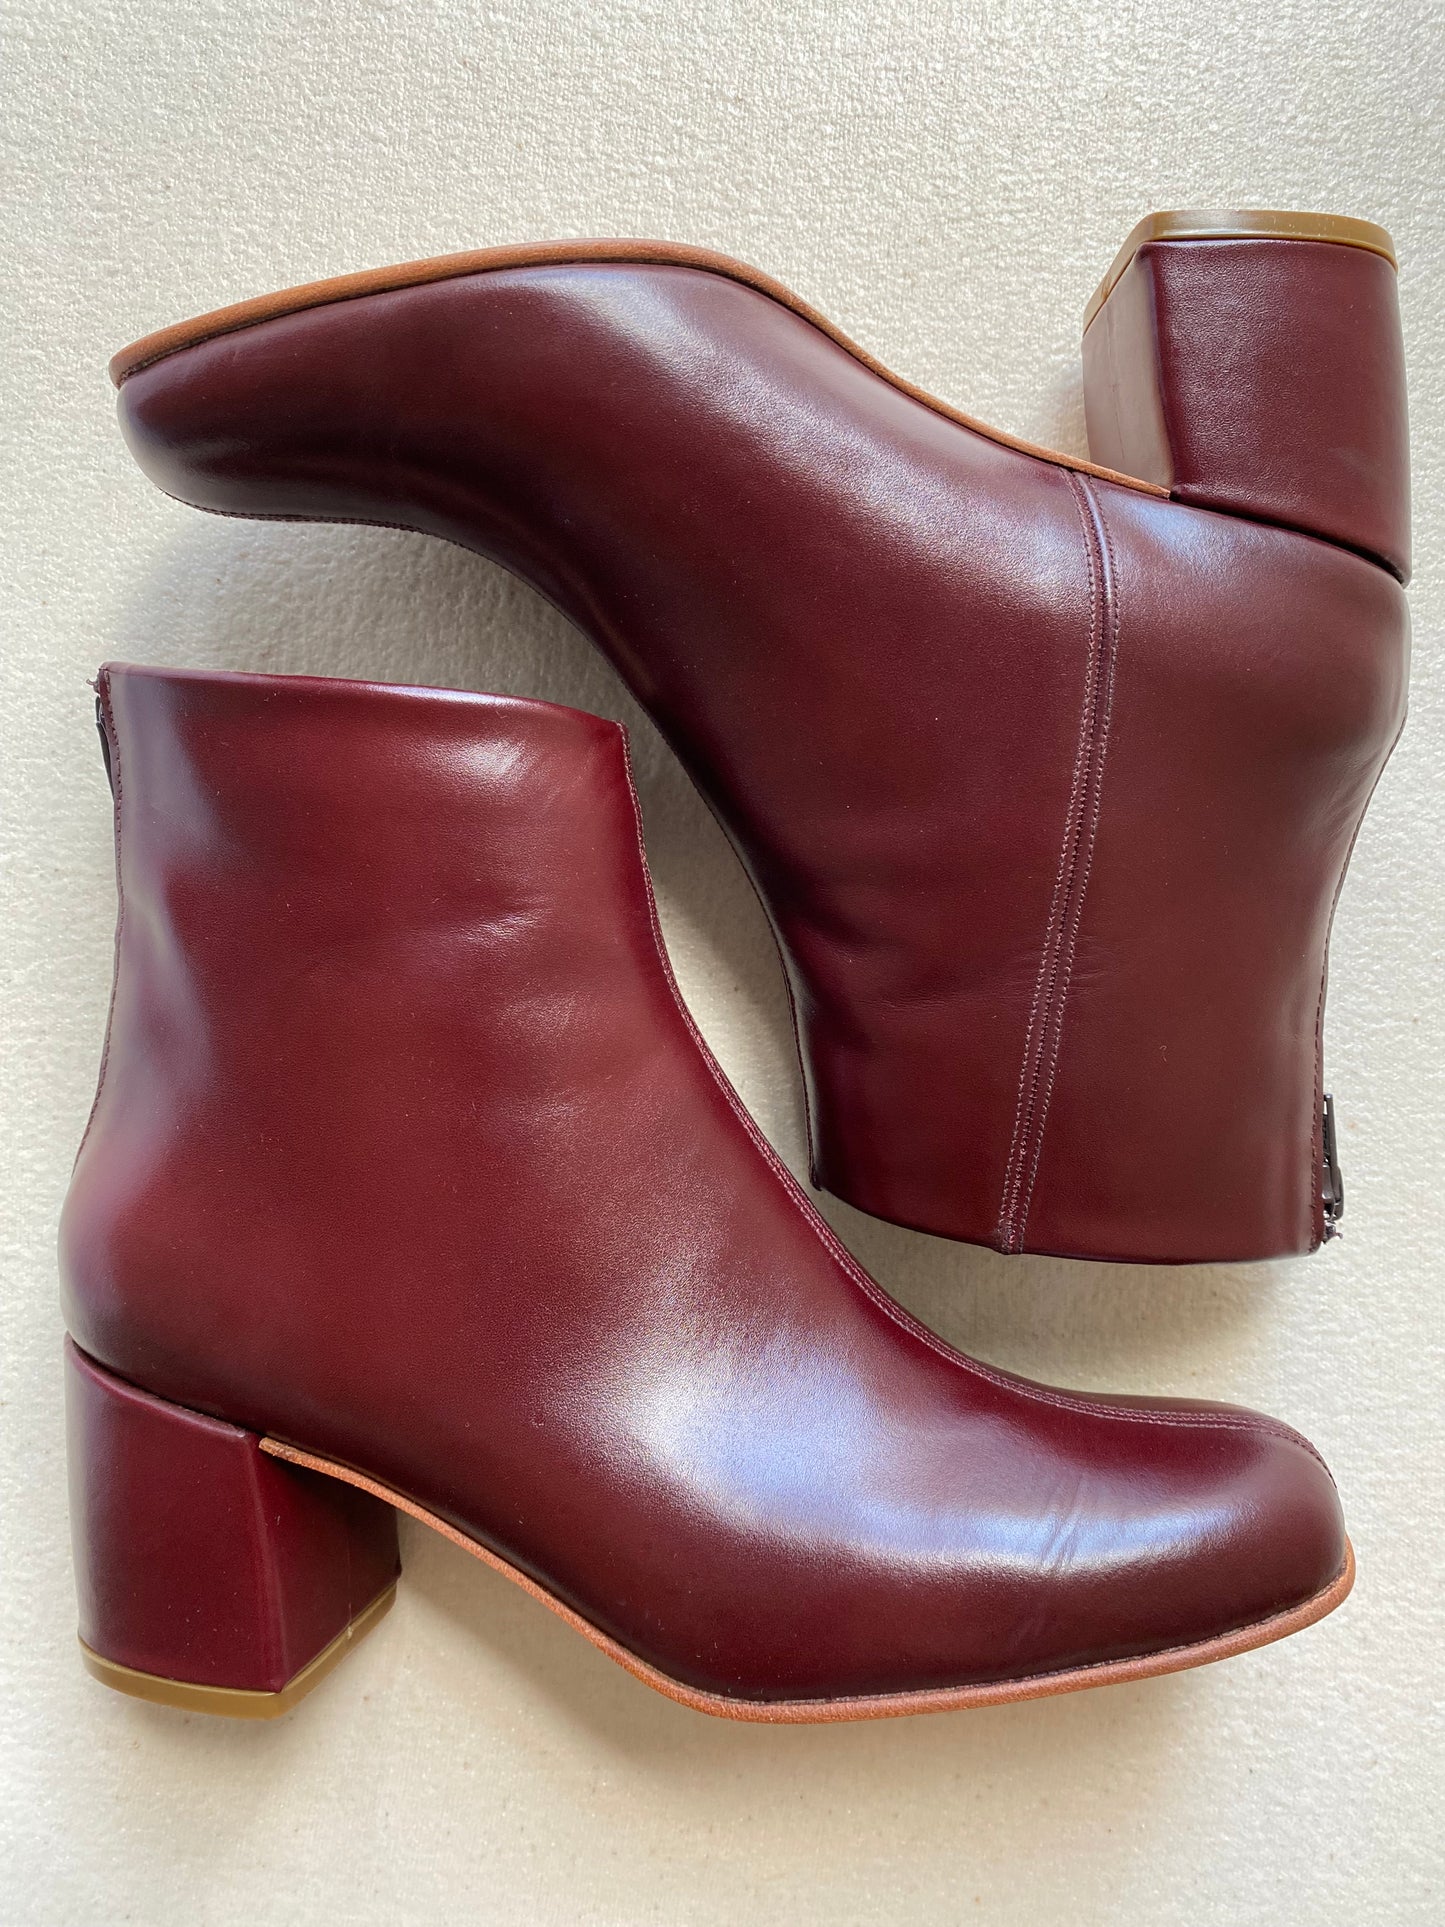 Beia Boot in Pinot Size 39